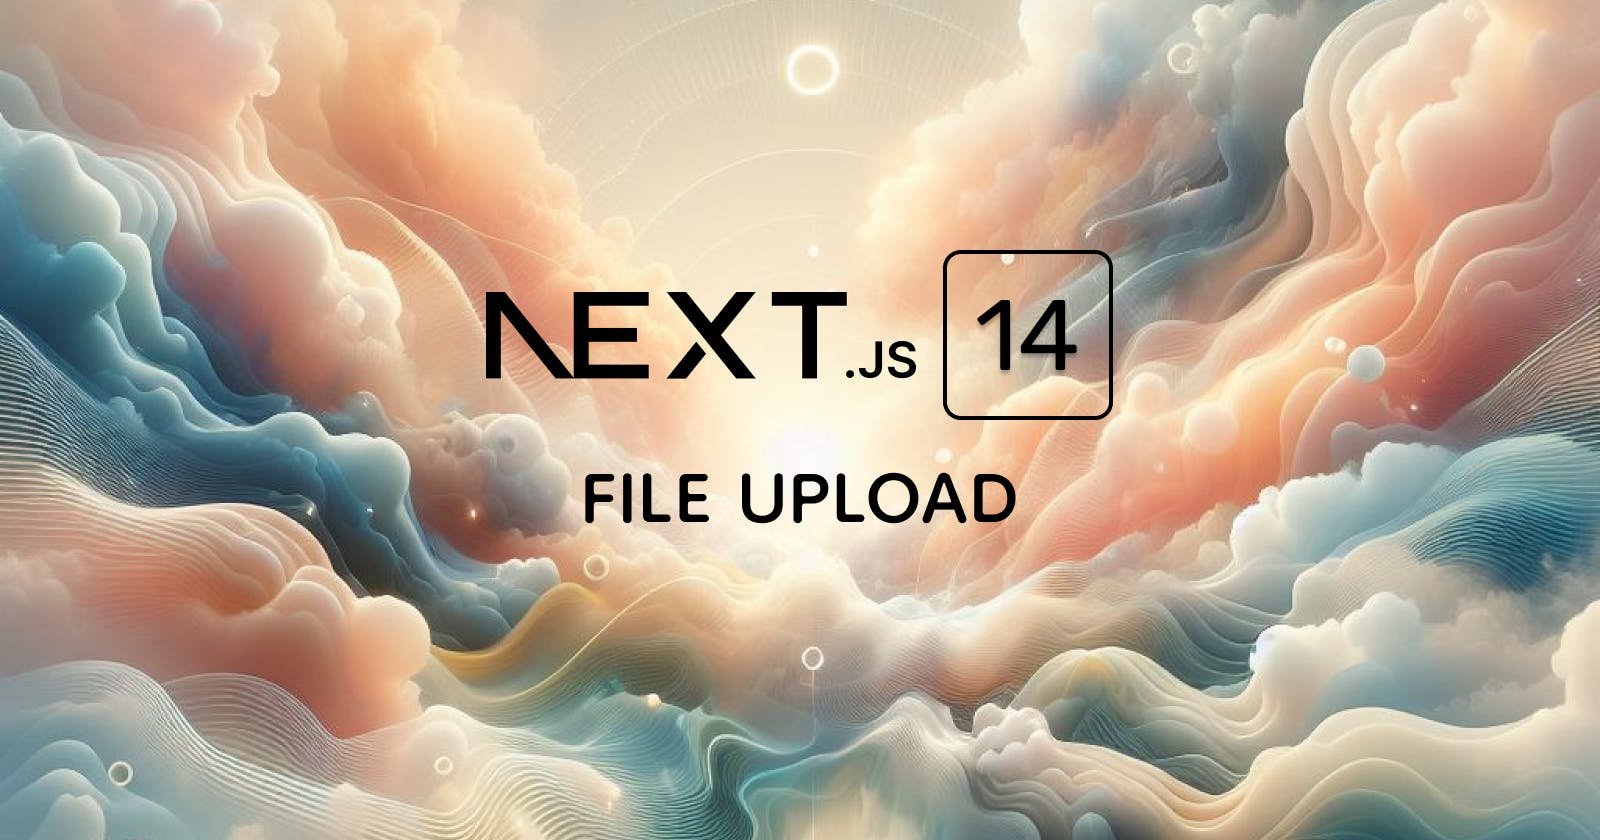 File Upload with Next.js 14 and Server Actions